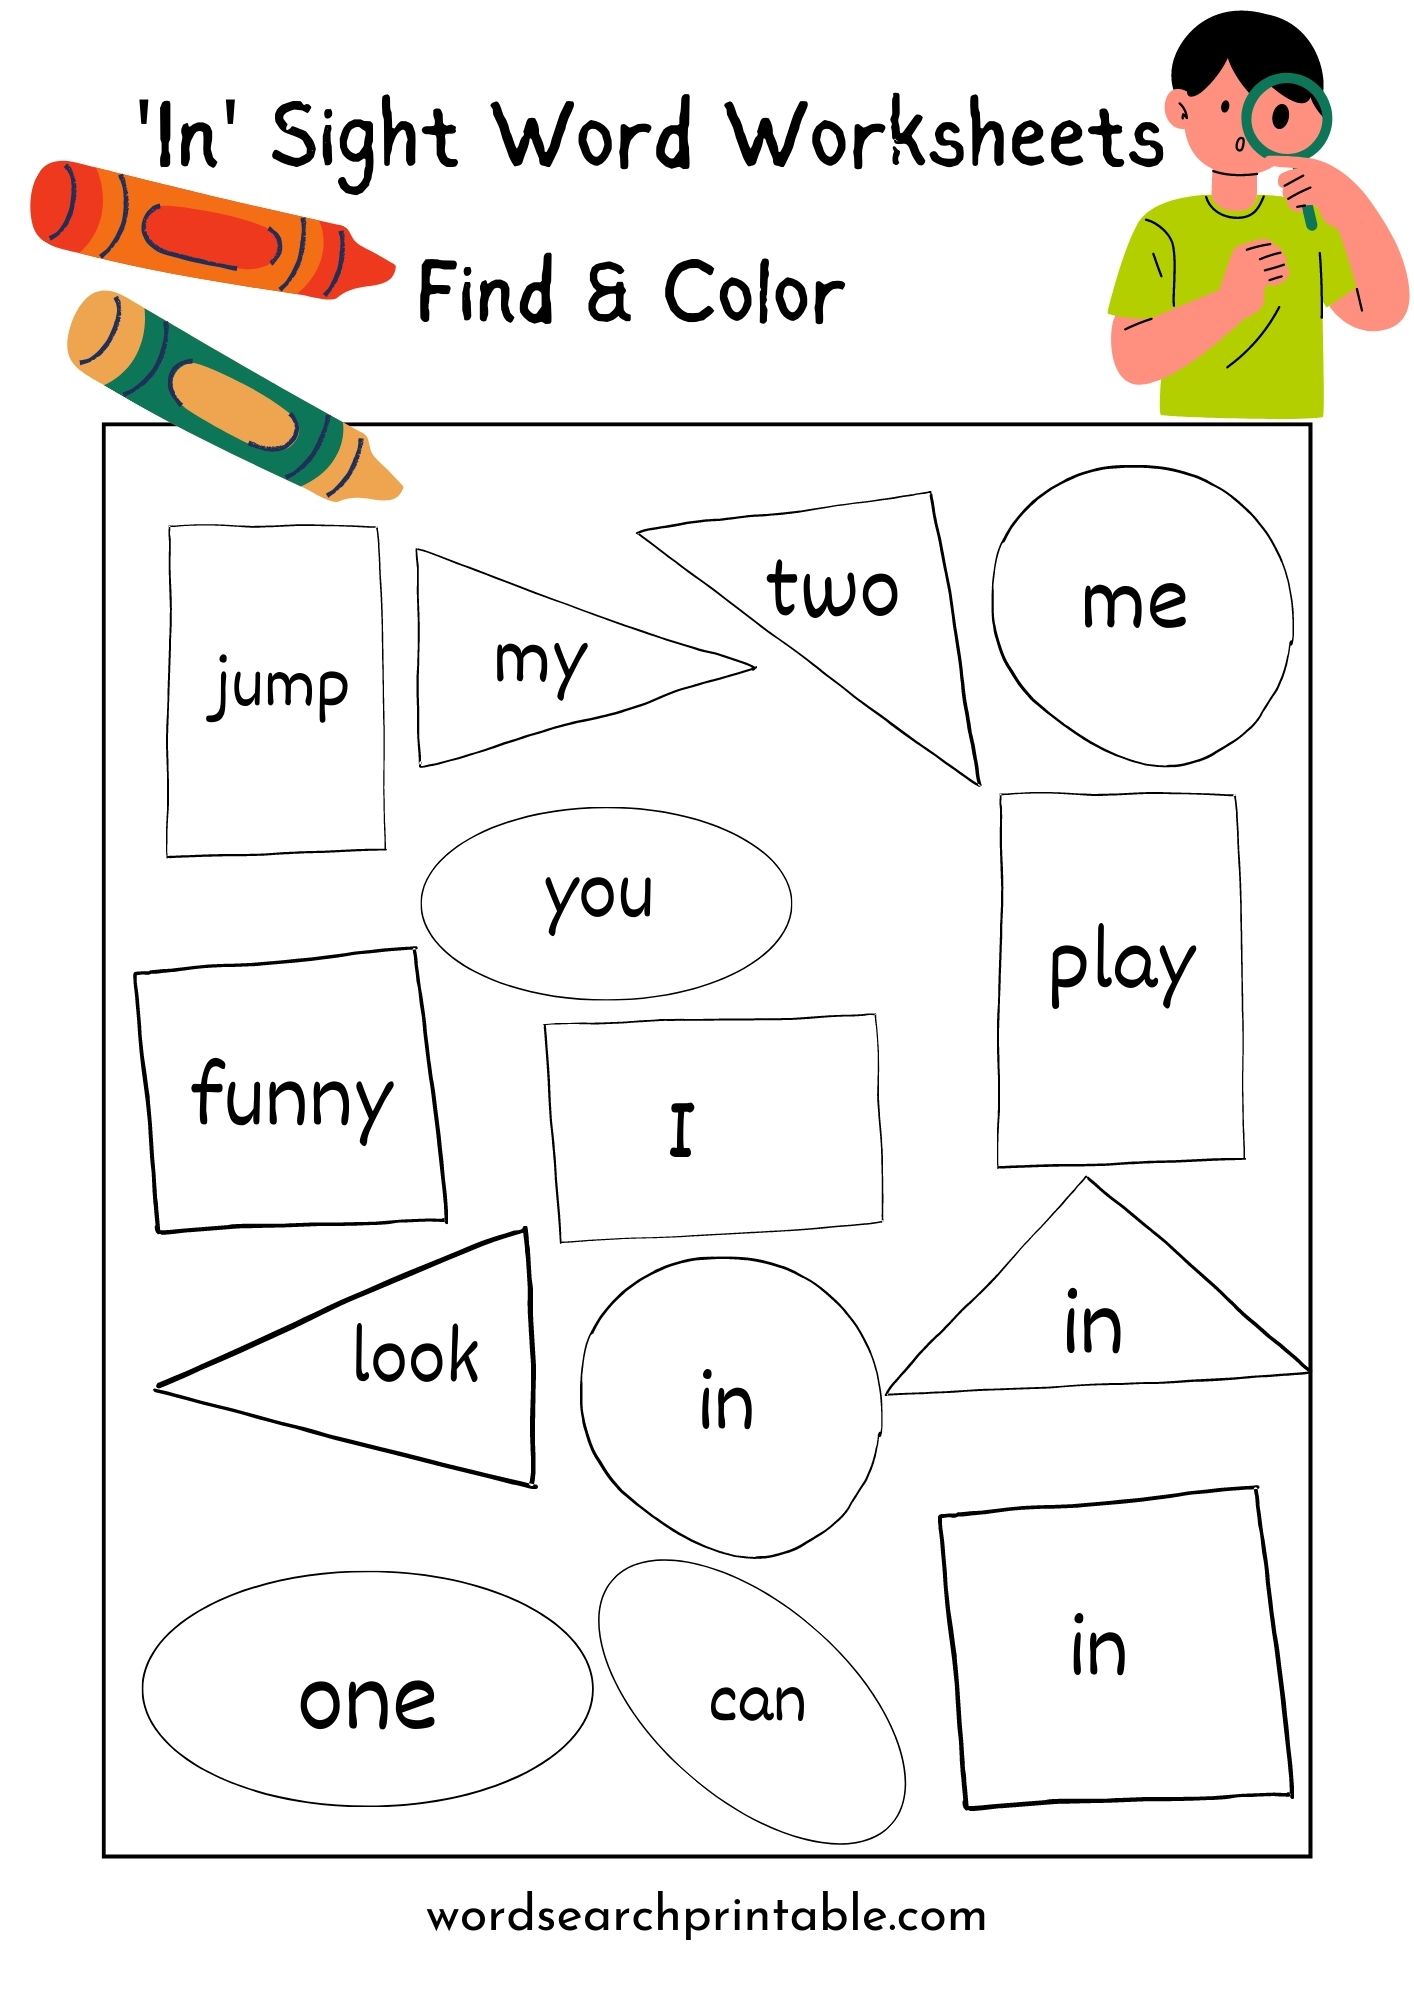 Find the sight word In and Color the geometric shape